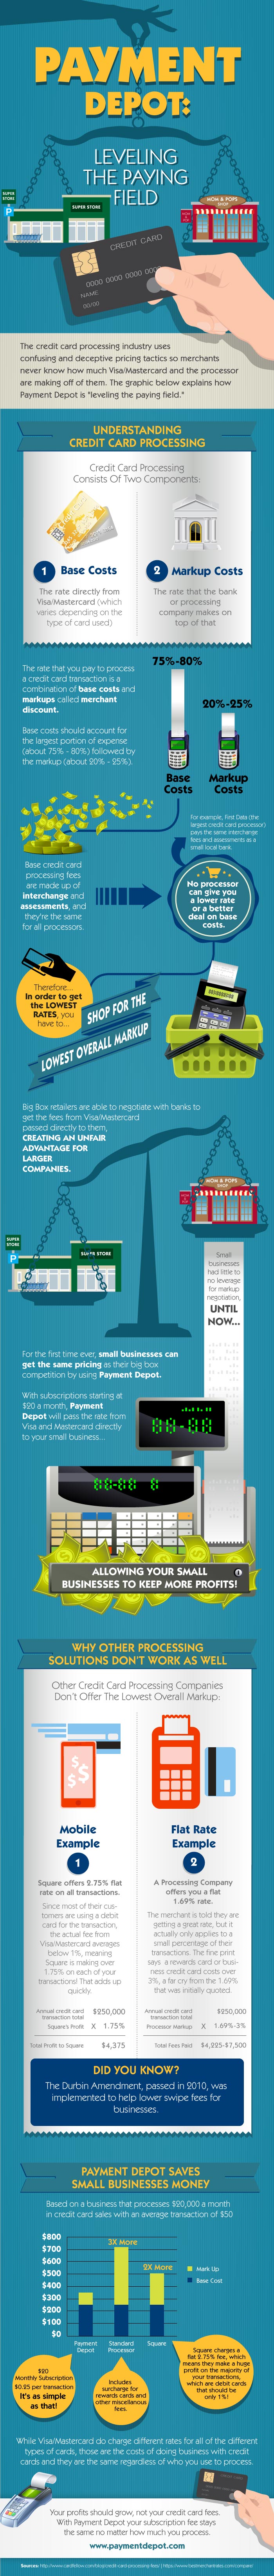 payment depot infographic